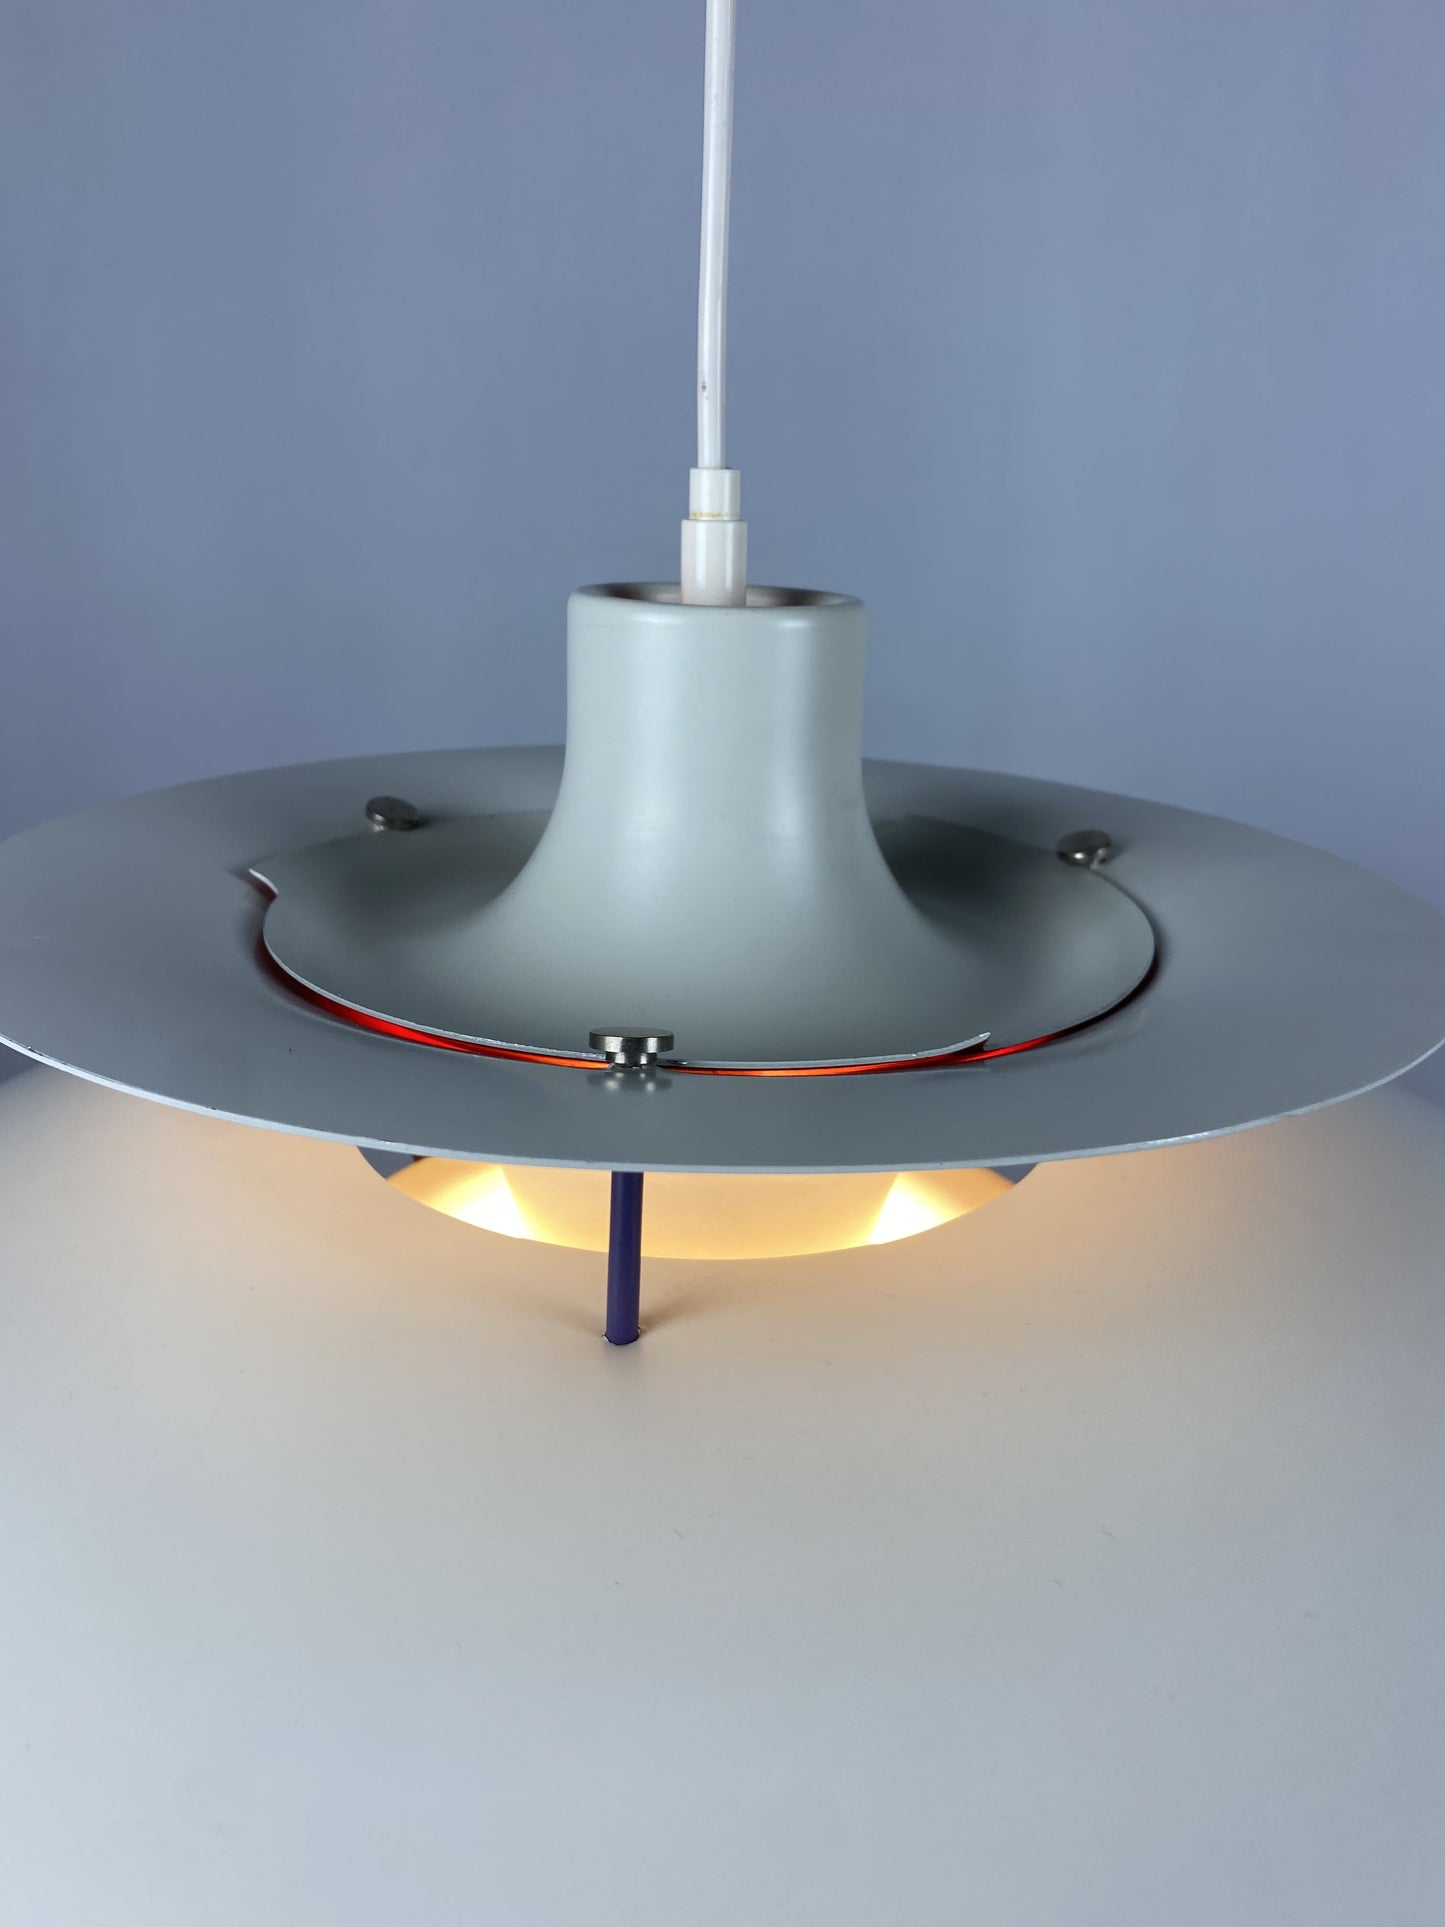 1 of 2 White and purple PH5 pendant light by Poul Henningsen for Louis Poulsen 1970